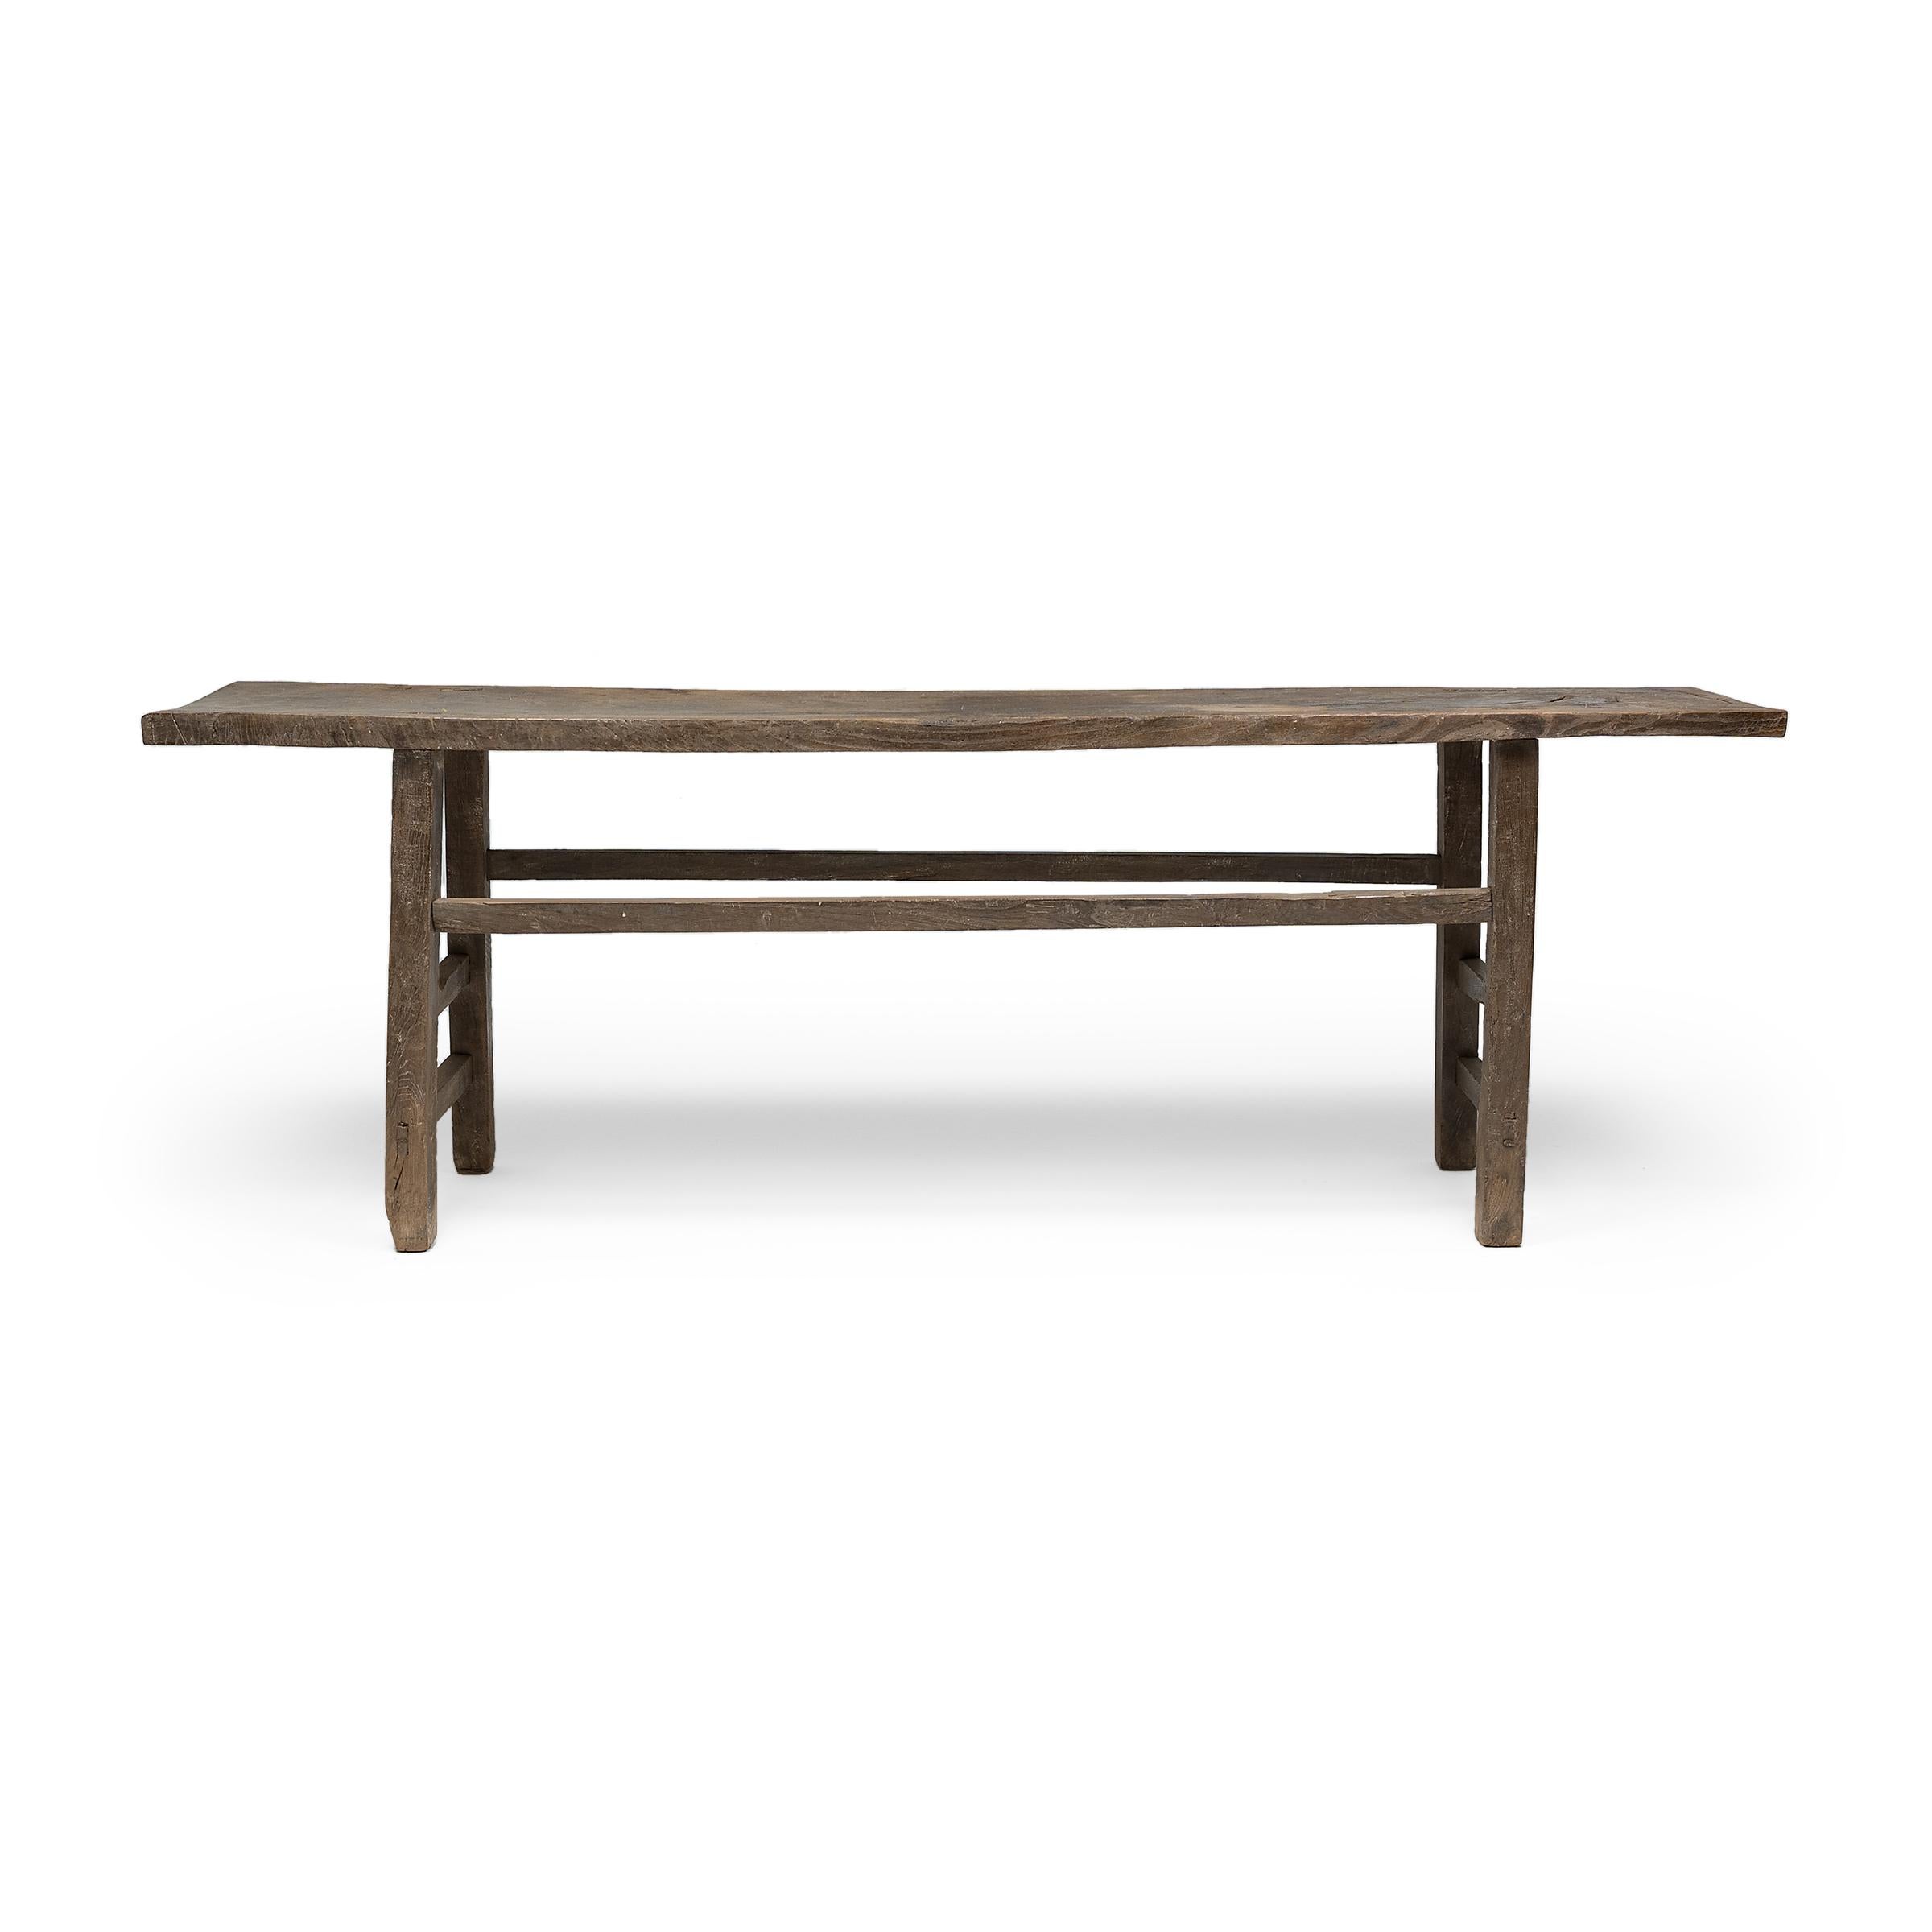 This low-profile rustic table was originally used in a provincial, Qing-dynasty home as a versatile surface for cooking, dining or drinking. Made of northern Chinese elmwood (yumu), the table has a plank-top surface and straight splayed legs